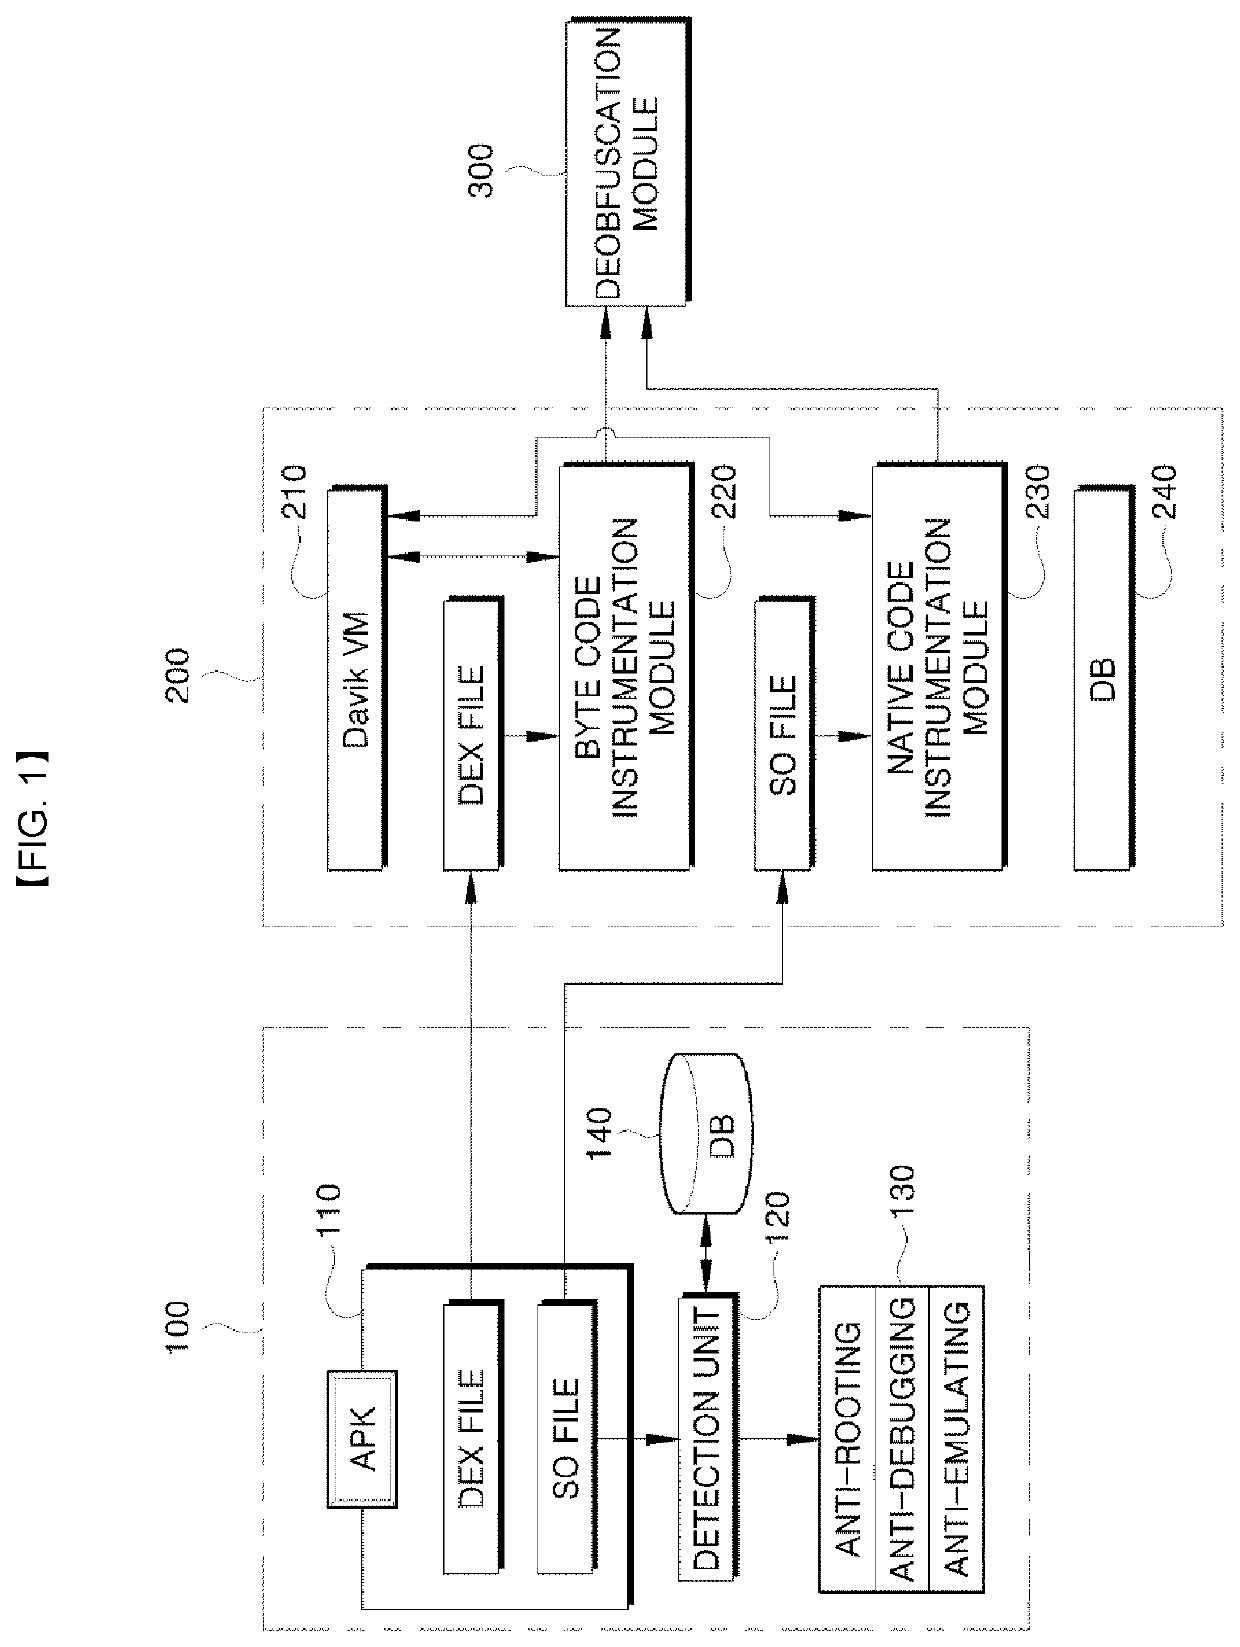 DYNAMIC CODE EXTRACTION-based AUTOMATIC ANTI-ANALYSIS EVASION AND CODE LOGIC ANALYSIS APPARATUS